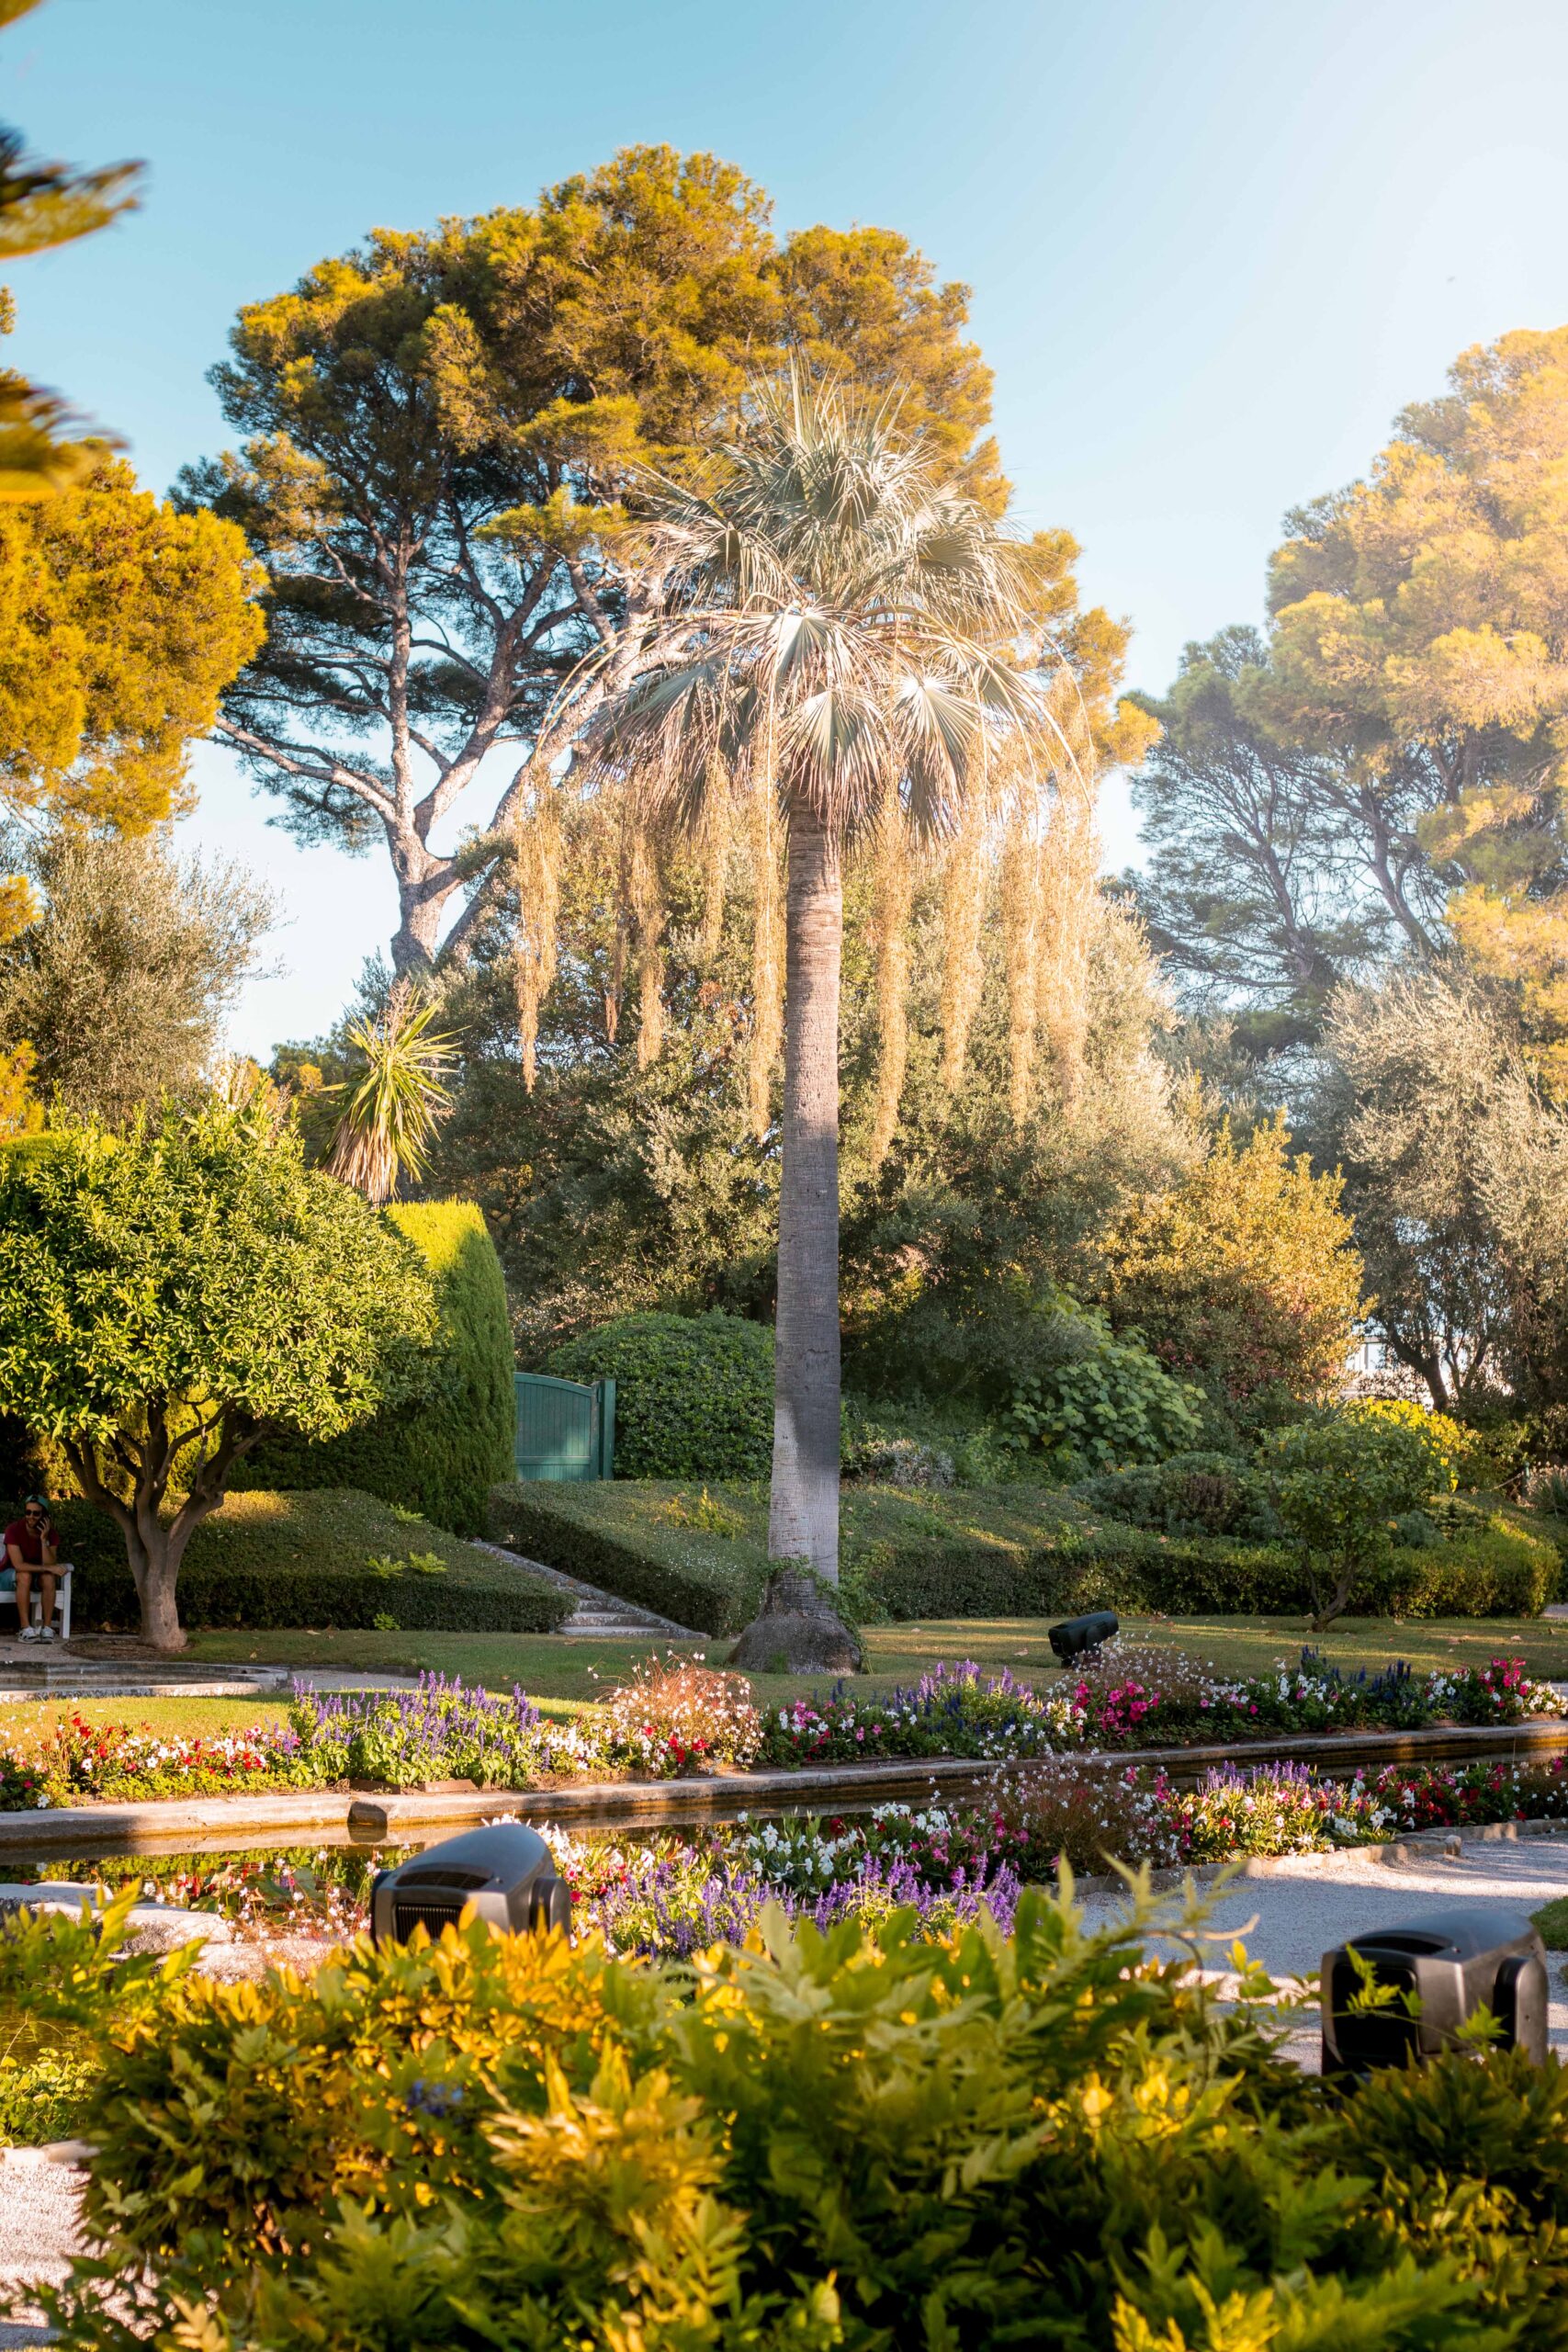 Details of ponds, flowers, and trees in the French Garden of Villa Ephrussi de Rothschild in Saint-Jean-Cap-Ferrat, France